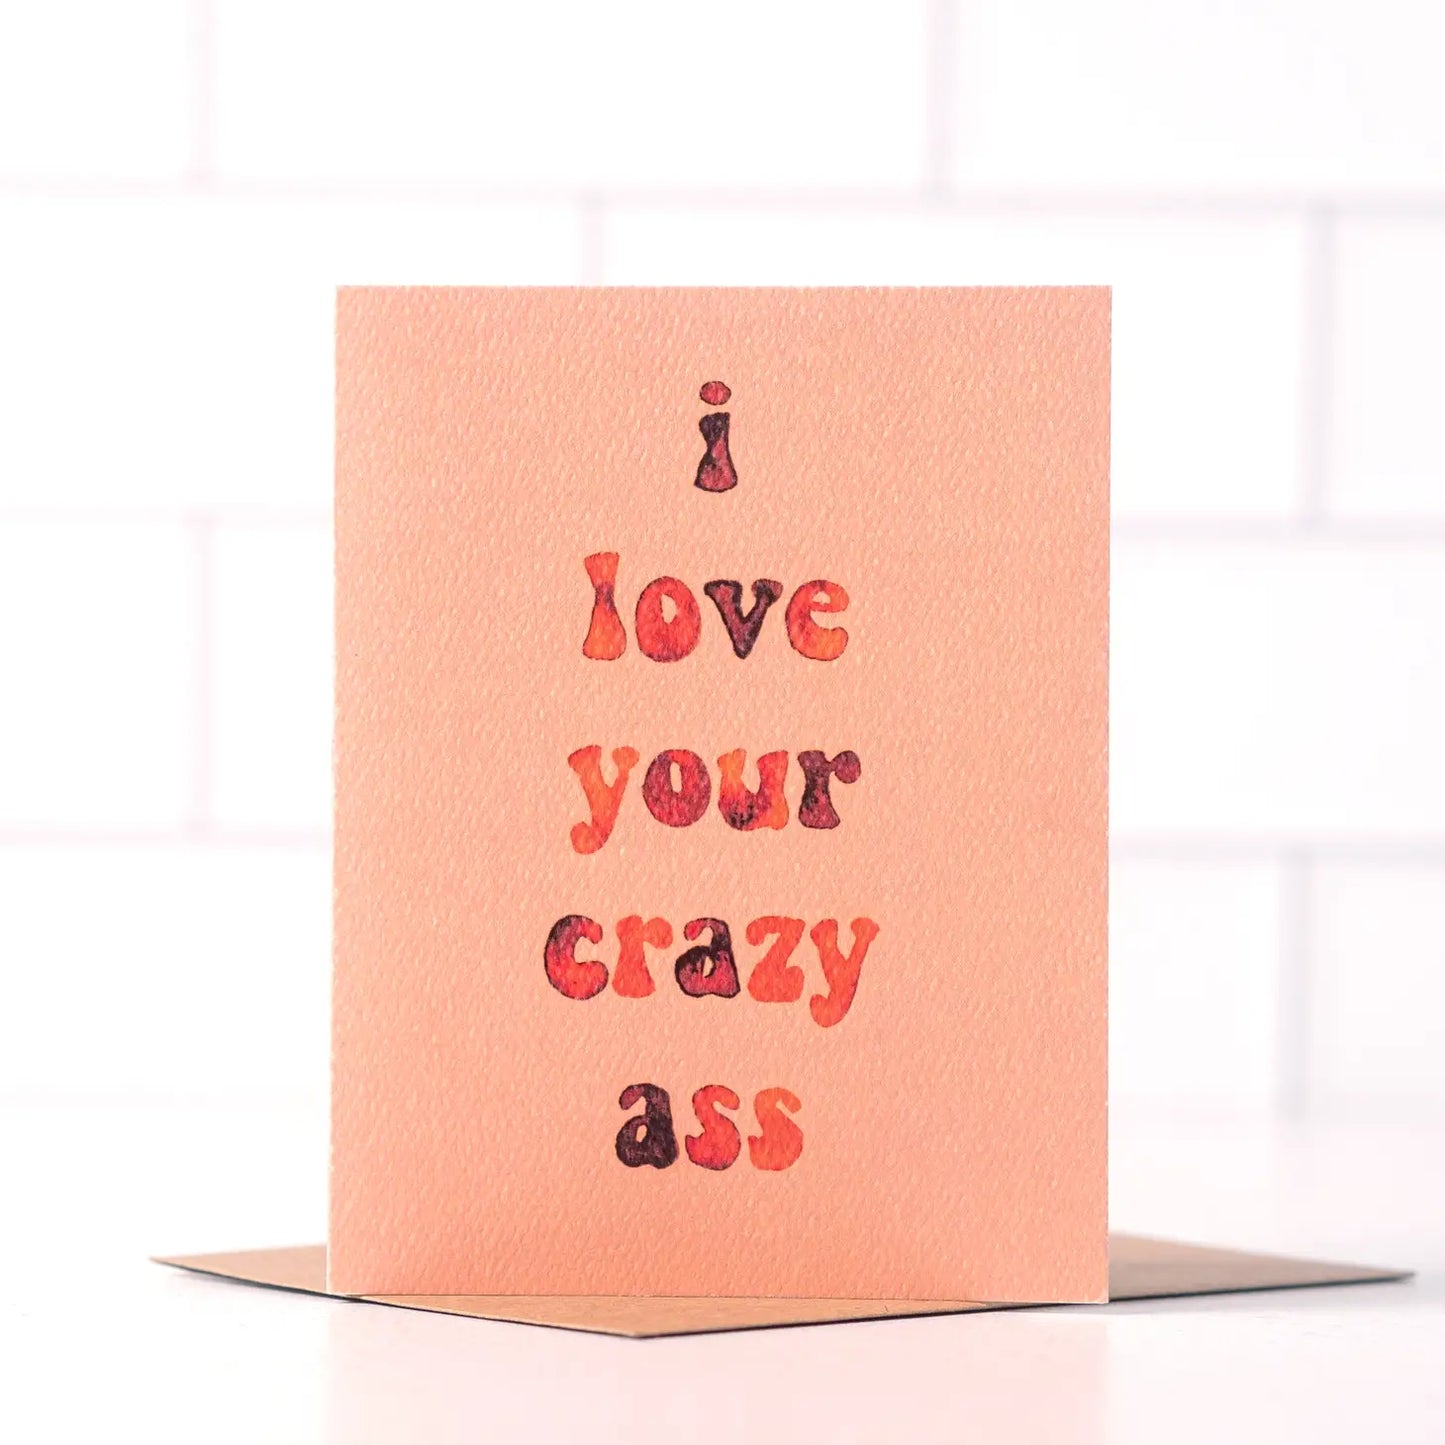 I Love Your Crazy Ass - Funny Love Card